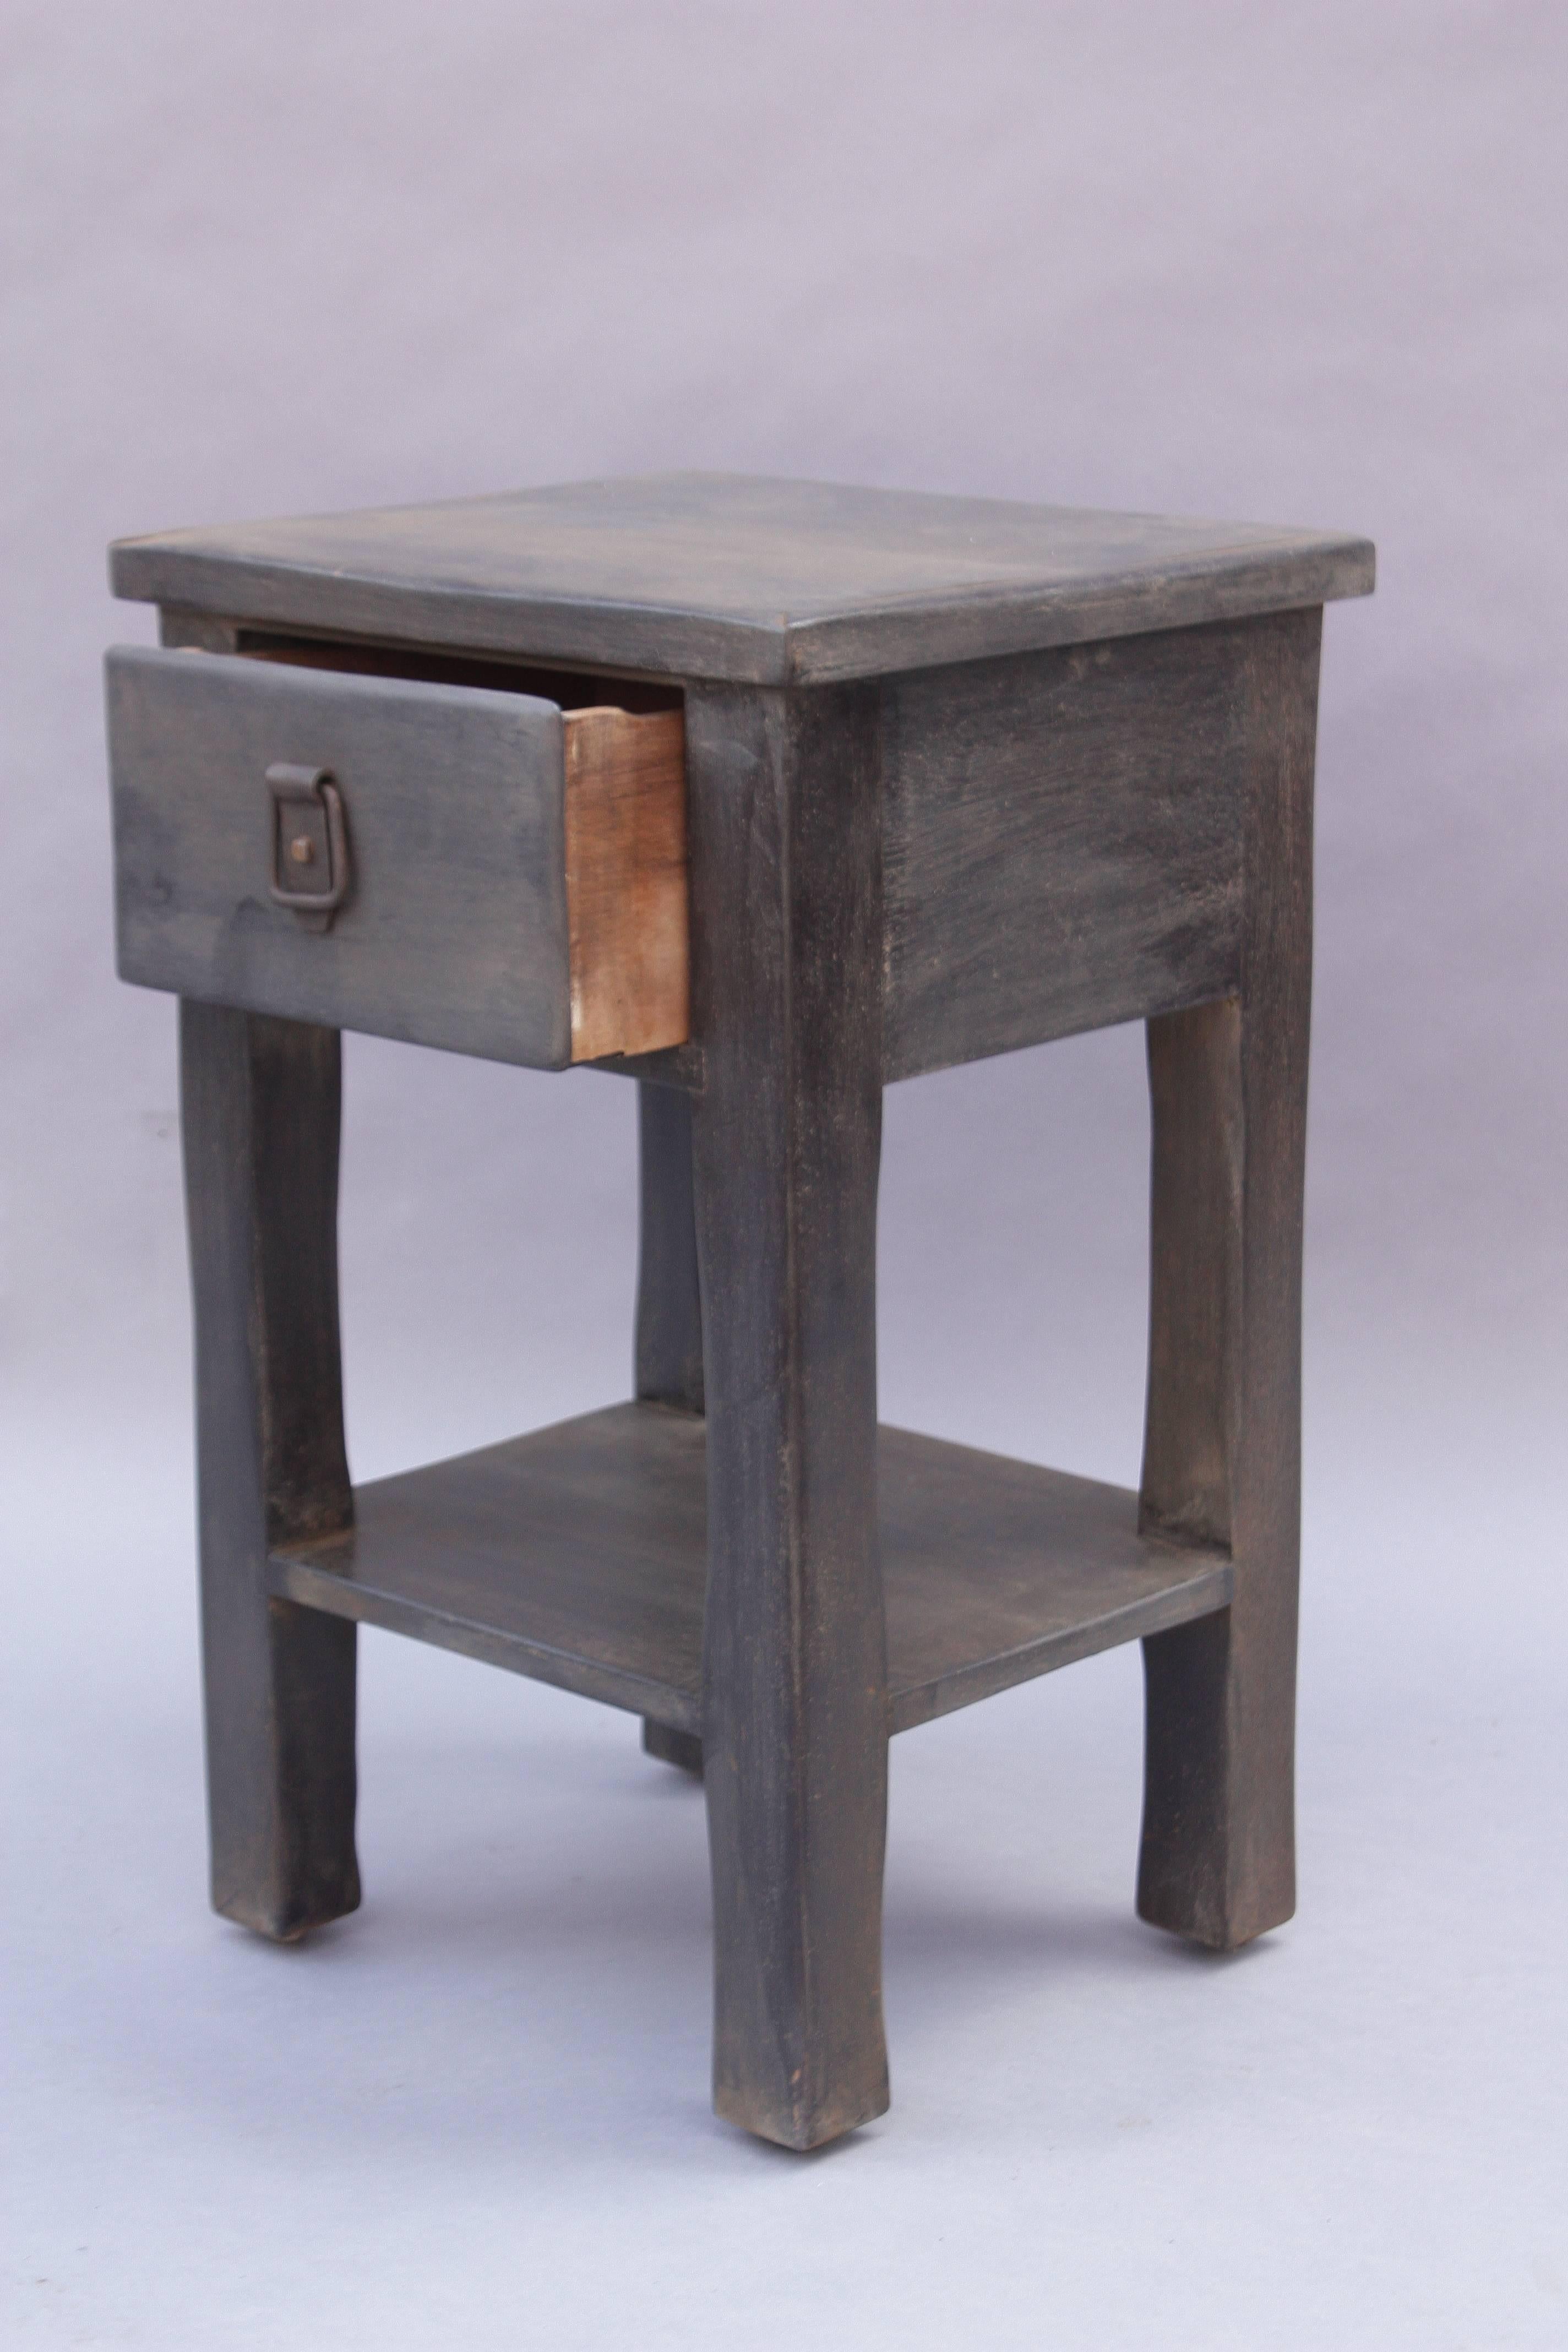 Monterey period nightstand with single drawer, circa 1930s.